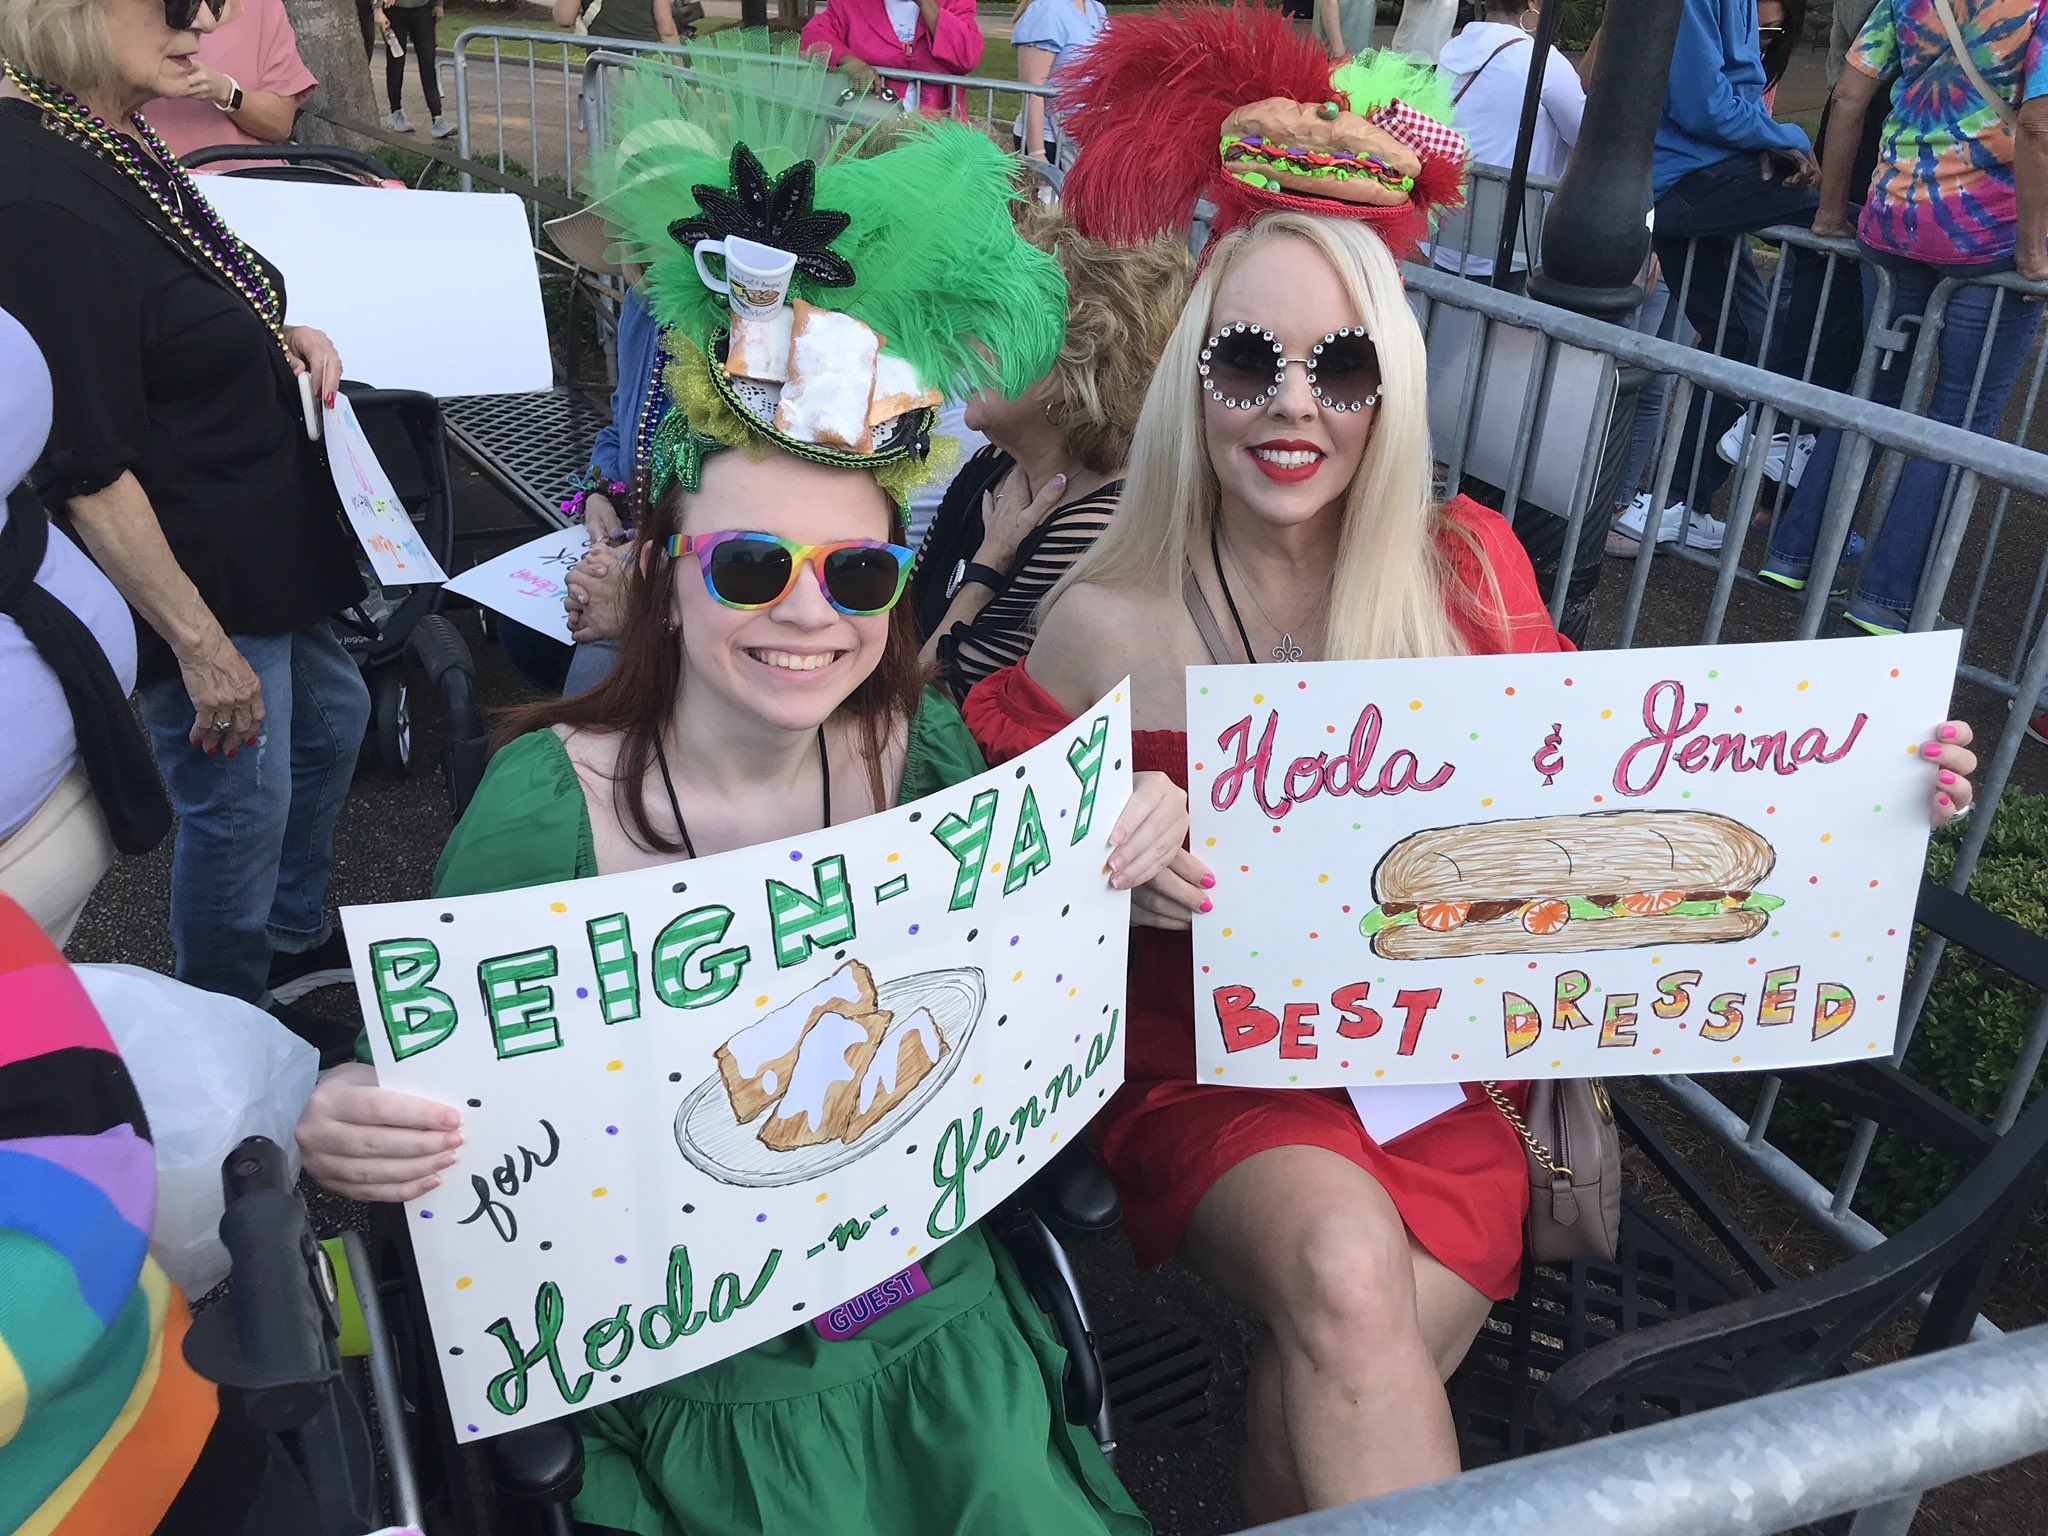 Photo shows two women dressed as beignets and poboys. They are holding signs that say "Beign-yay for Hoda n Jenna" and "Hoda & Jenna best dressed"